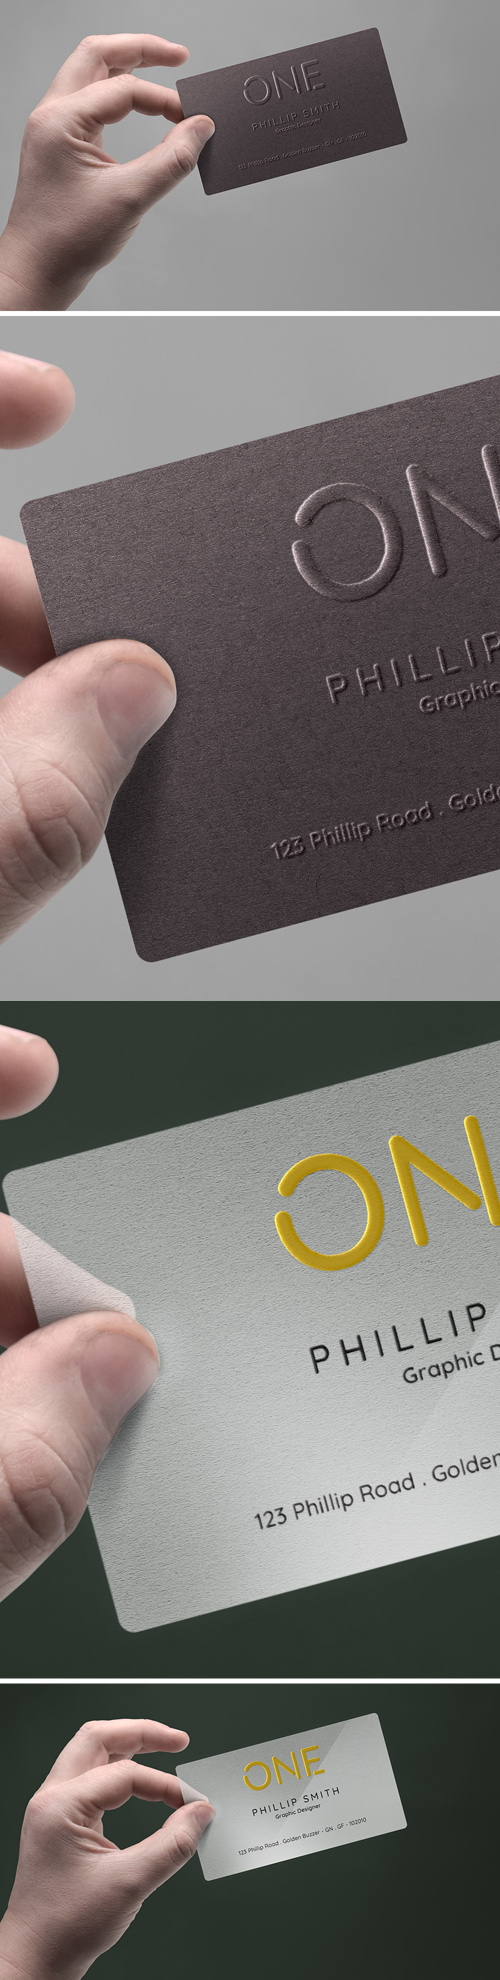 Realistic Business Card In Hand PSD Mockup Template